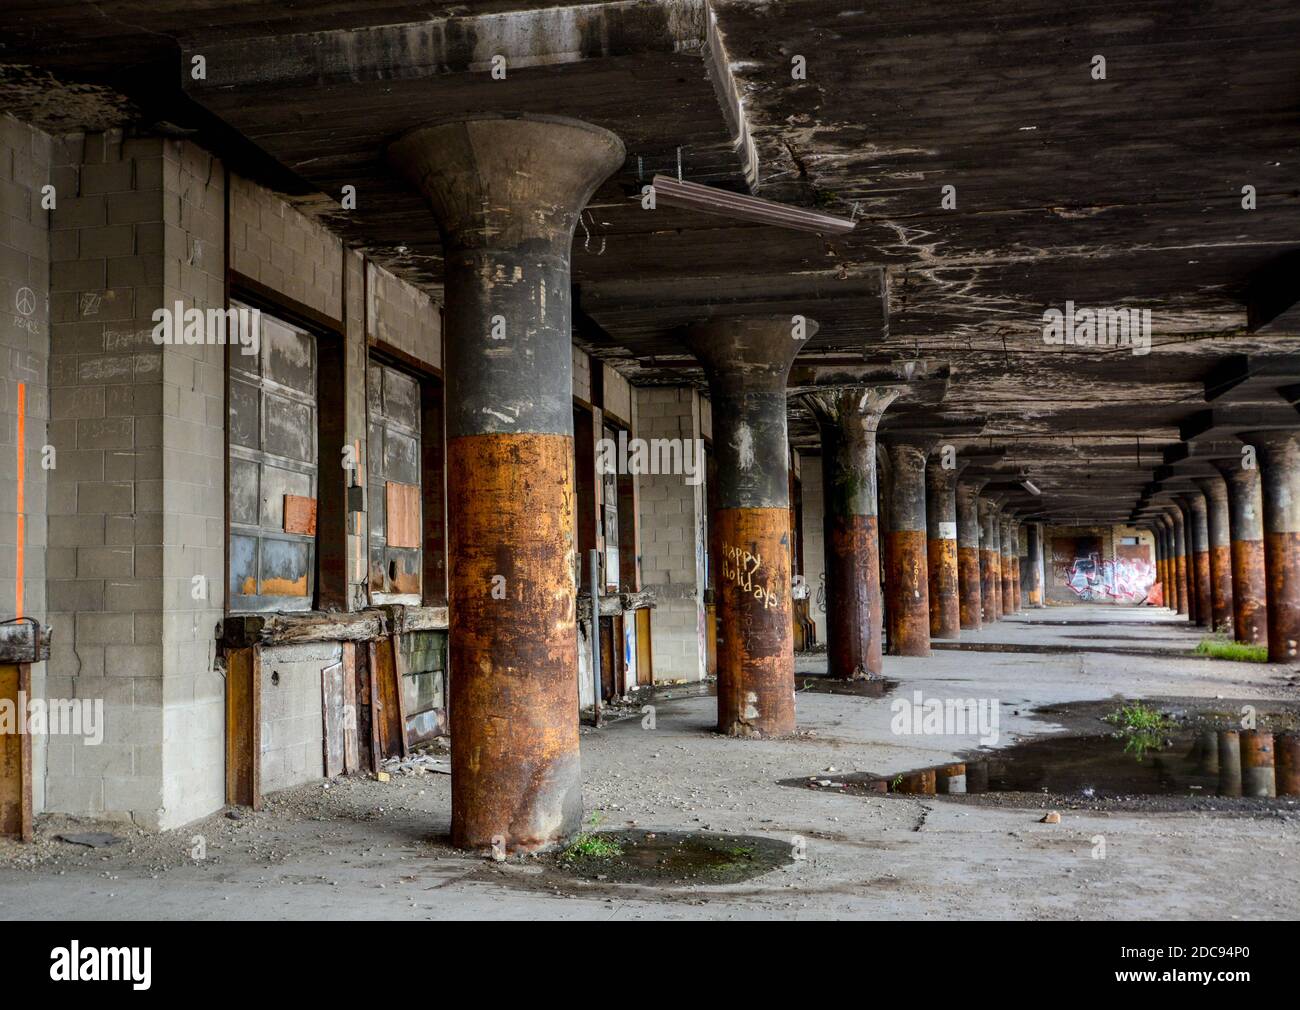 Old and abandoned warehouse loading docks that are falling apart and desolate Stock Photo